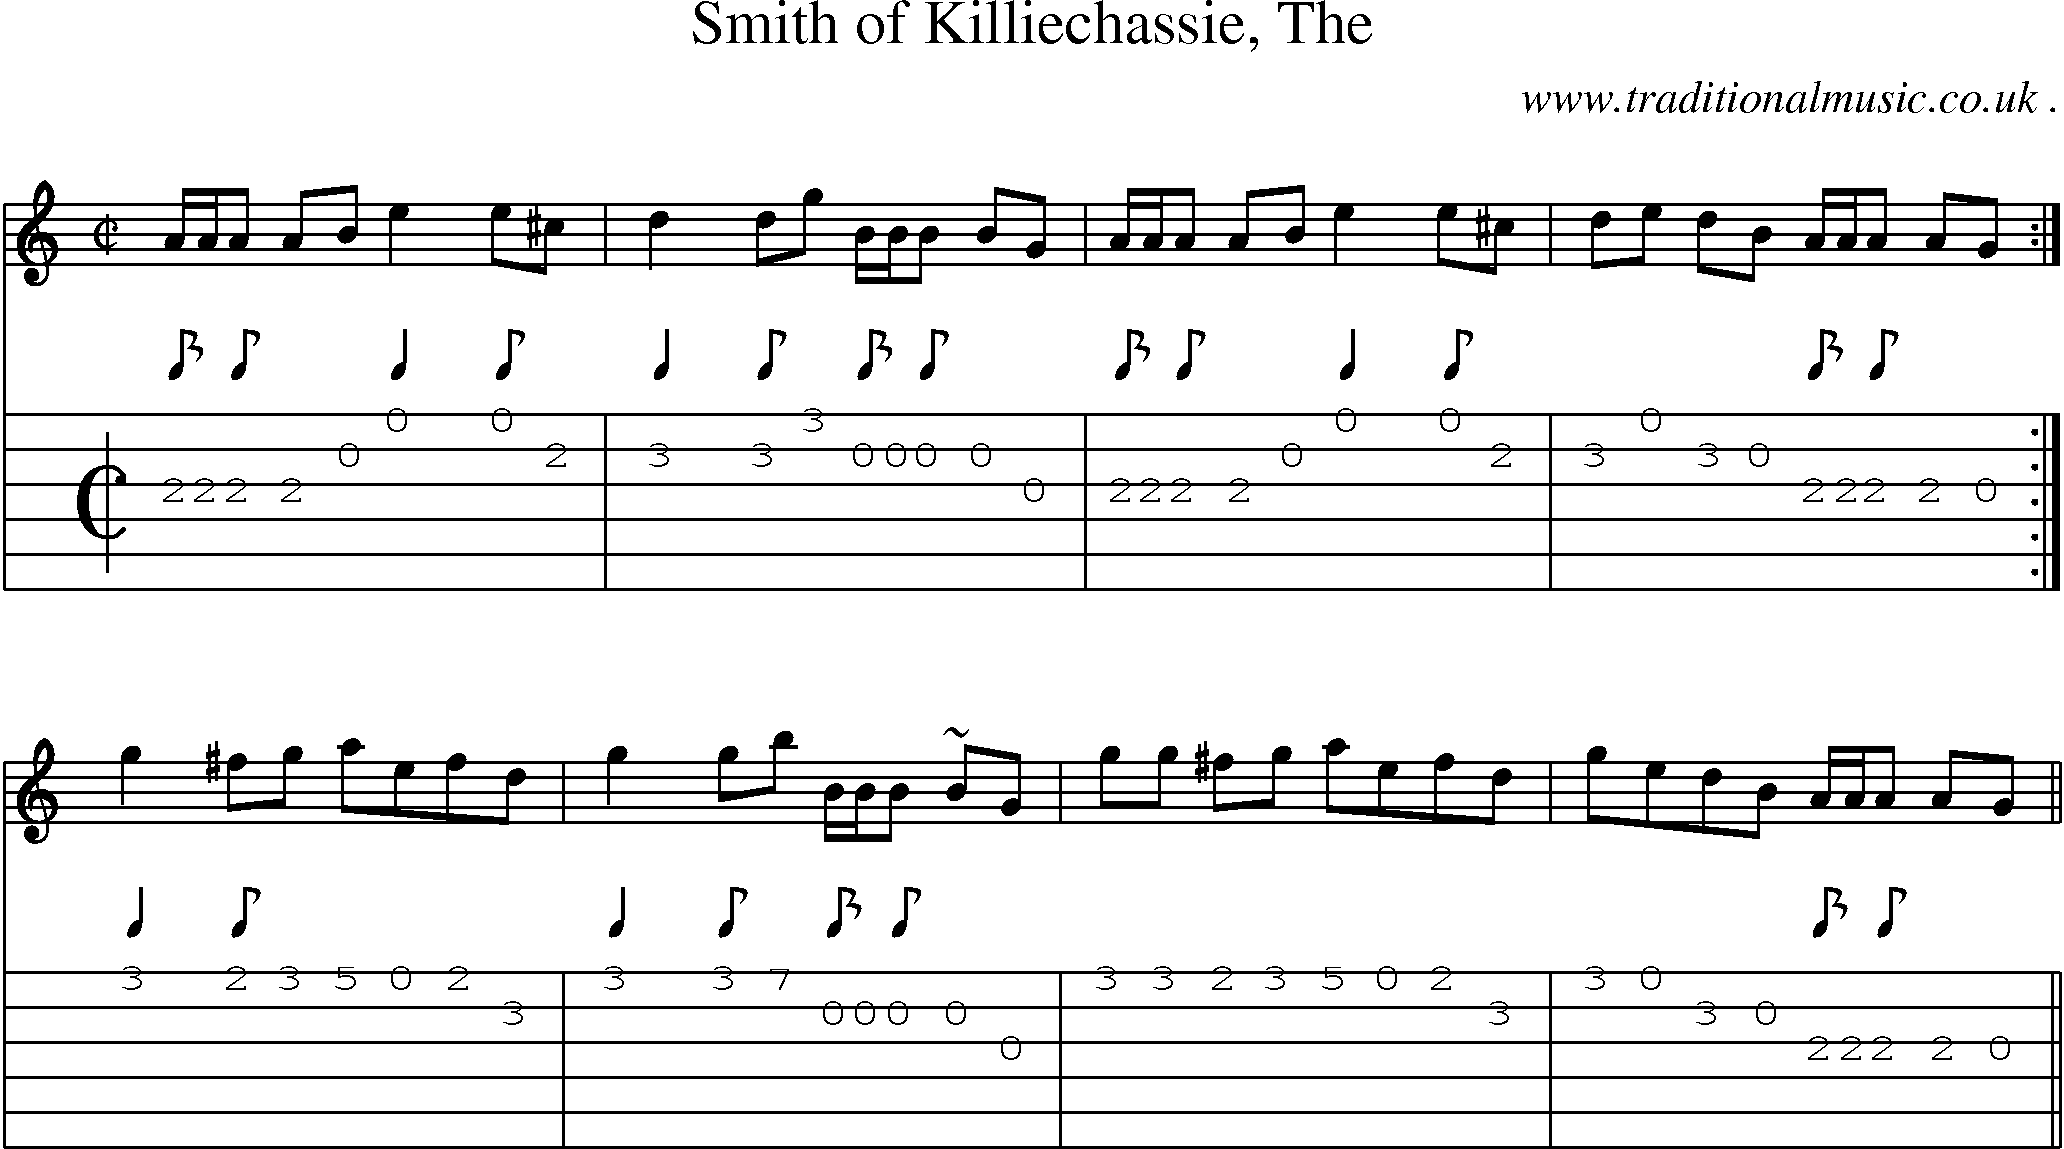 Sheet-music  score, Chords and Guitar Tabs for Smith Of Killiechassie The